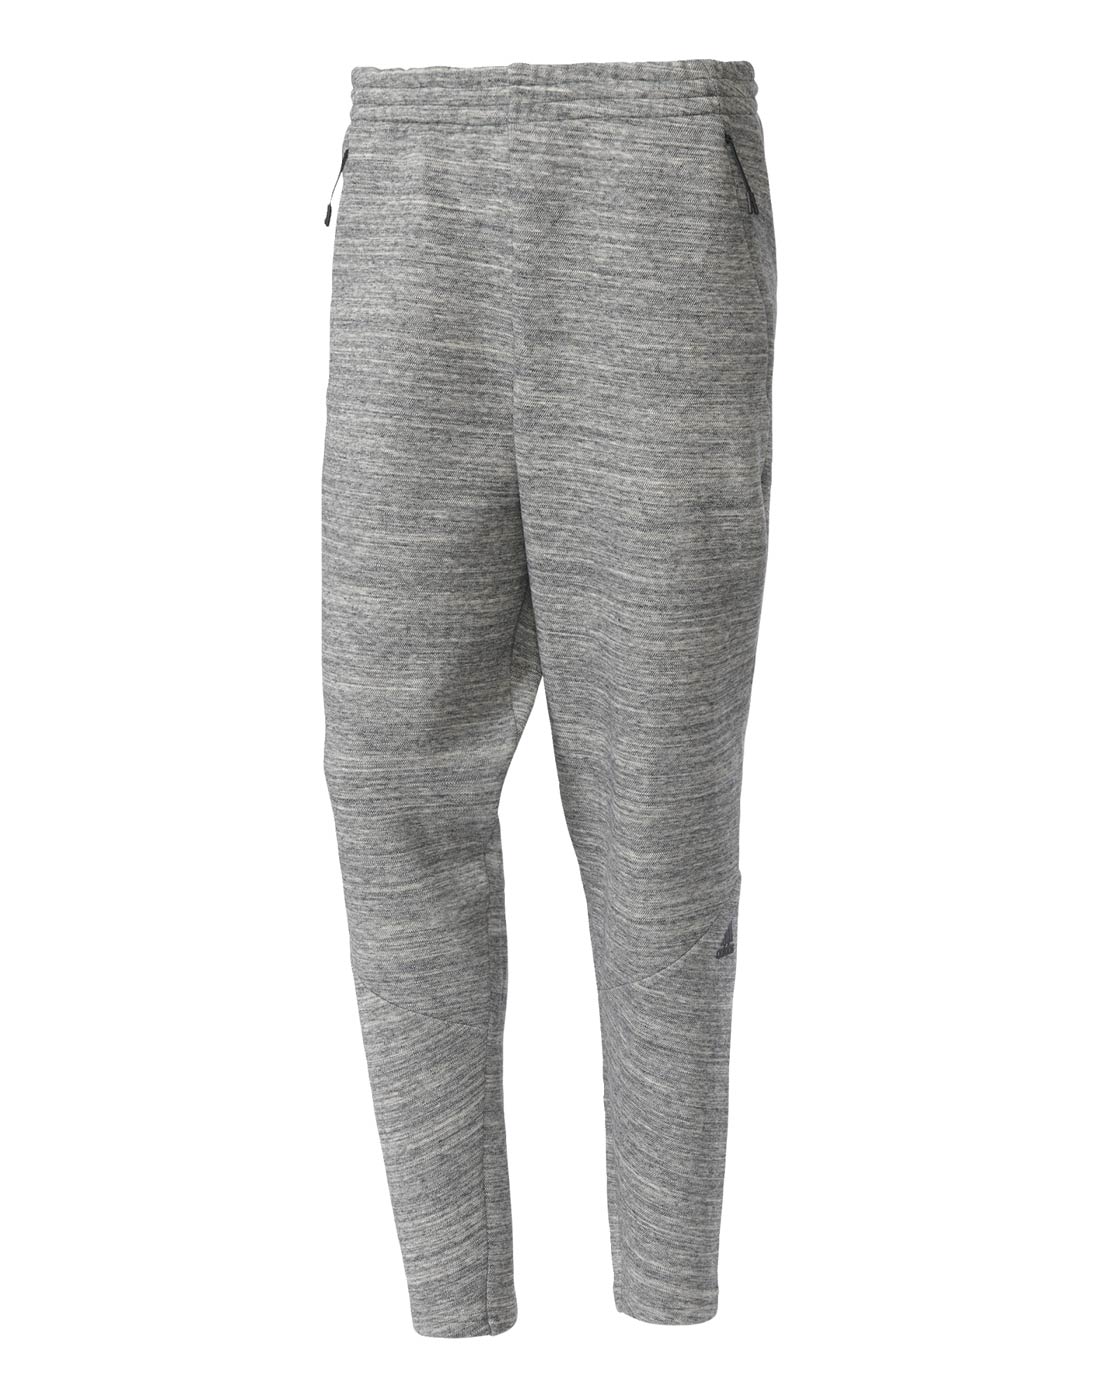 adidas Mens ZNE Travel Tracksuit Pant - Grey | Life Style Sports IE